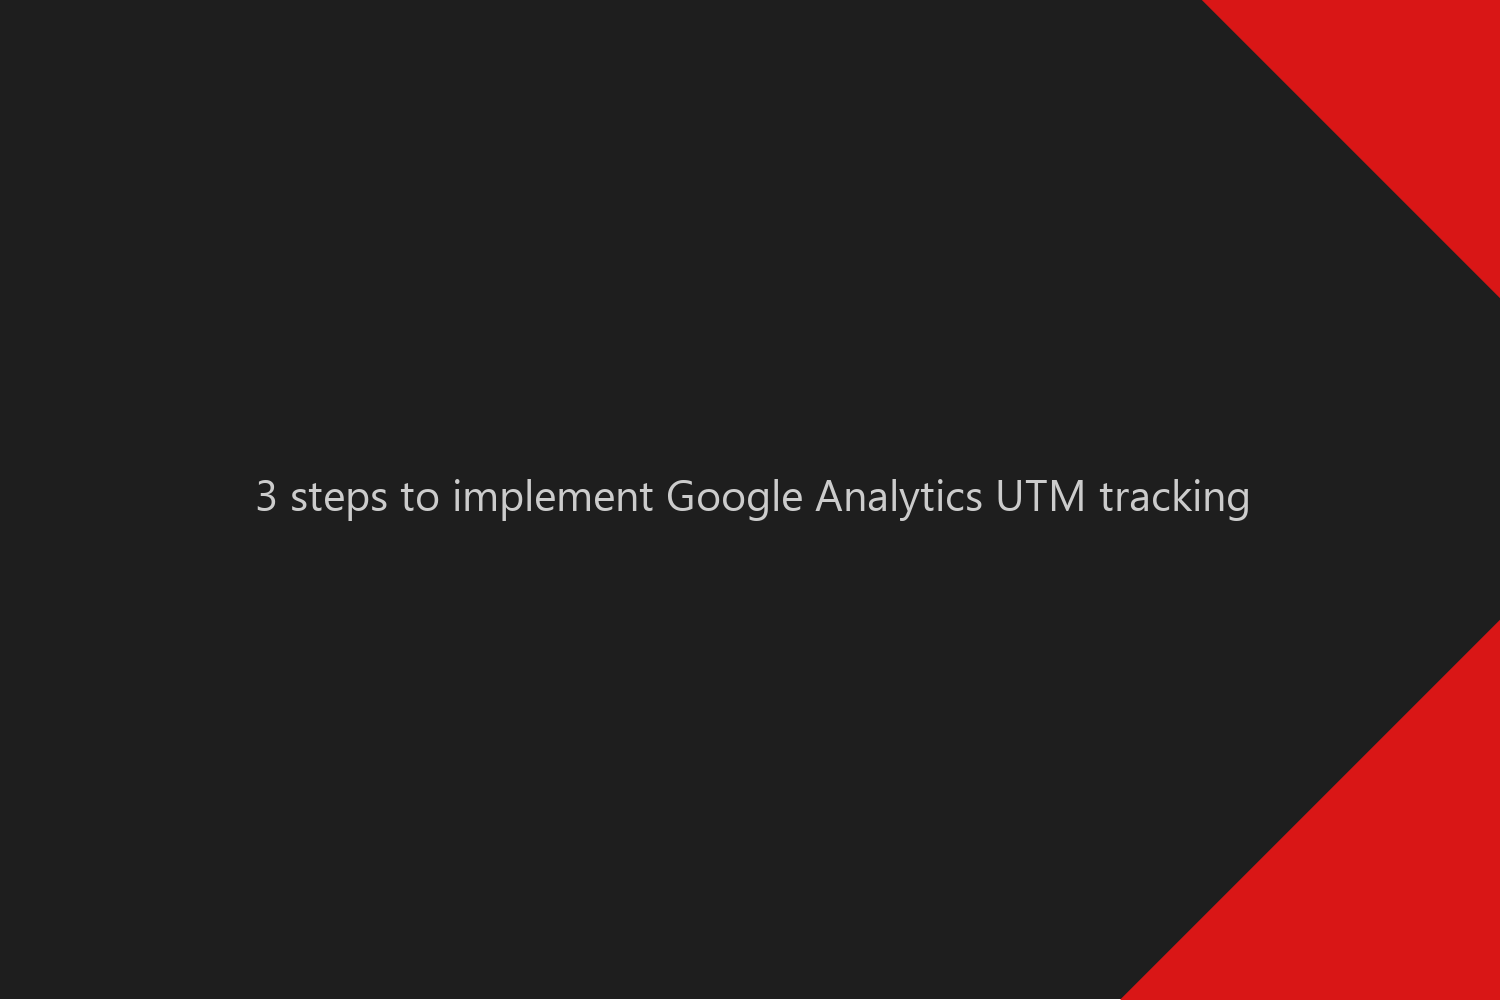 3 steps to implement Google Analytics UTM tracking